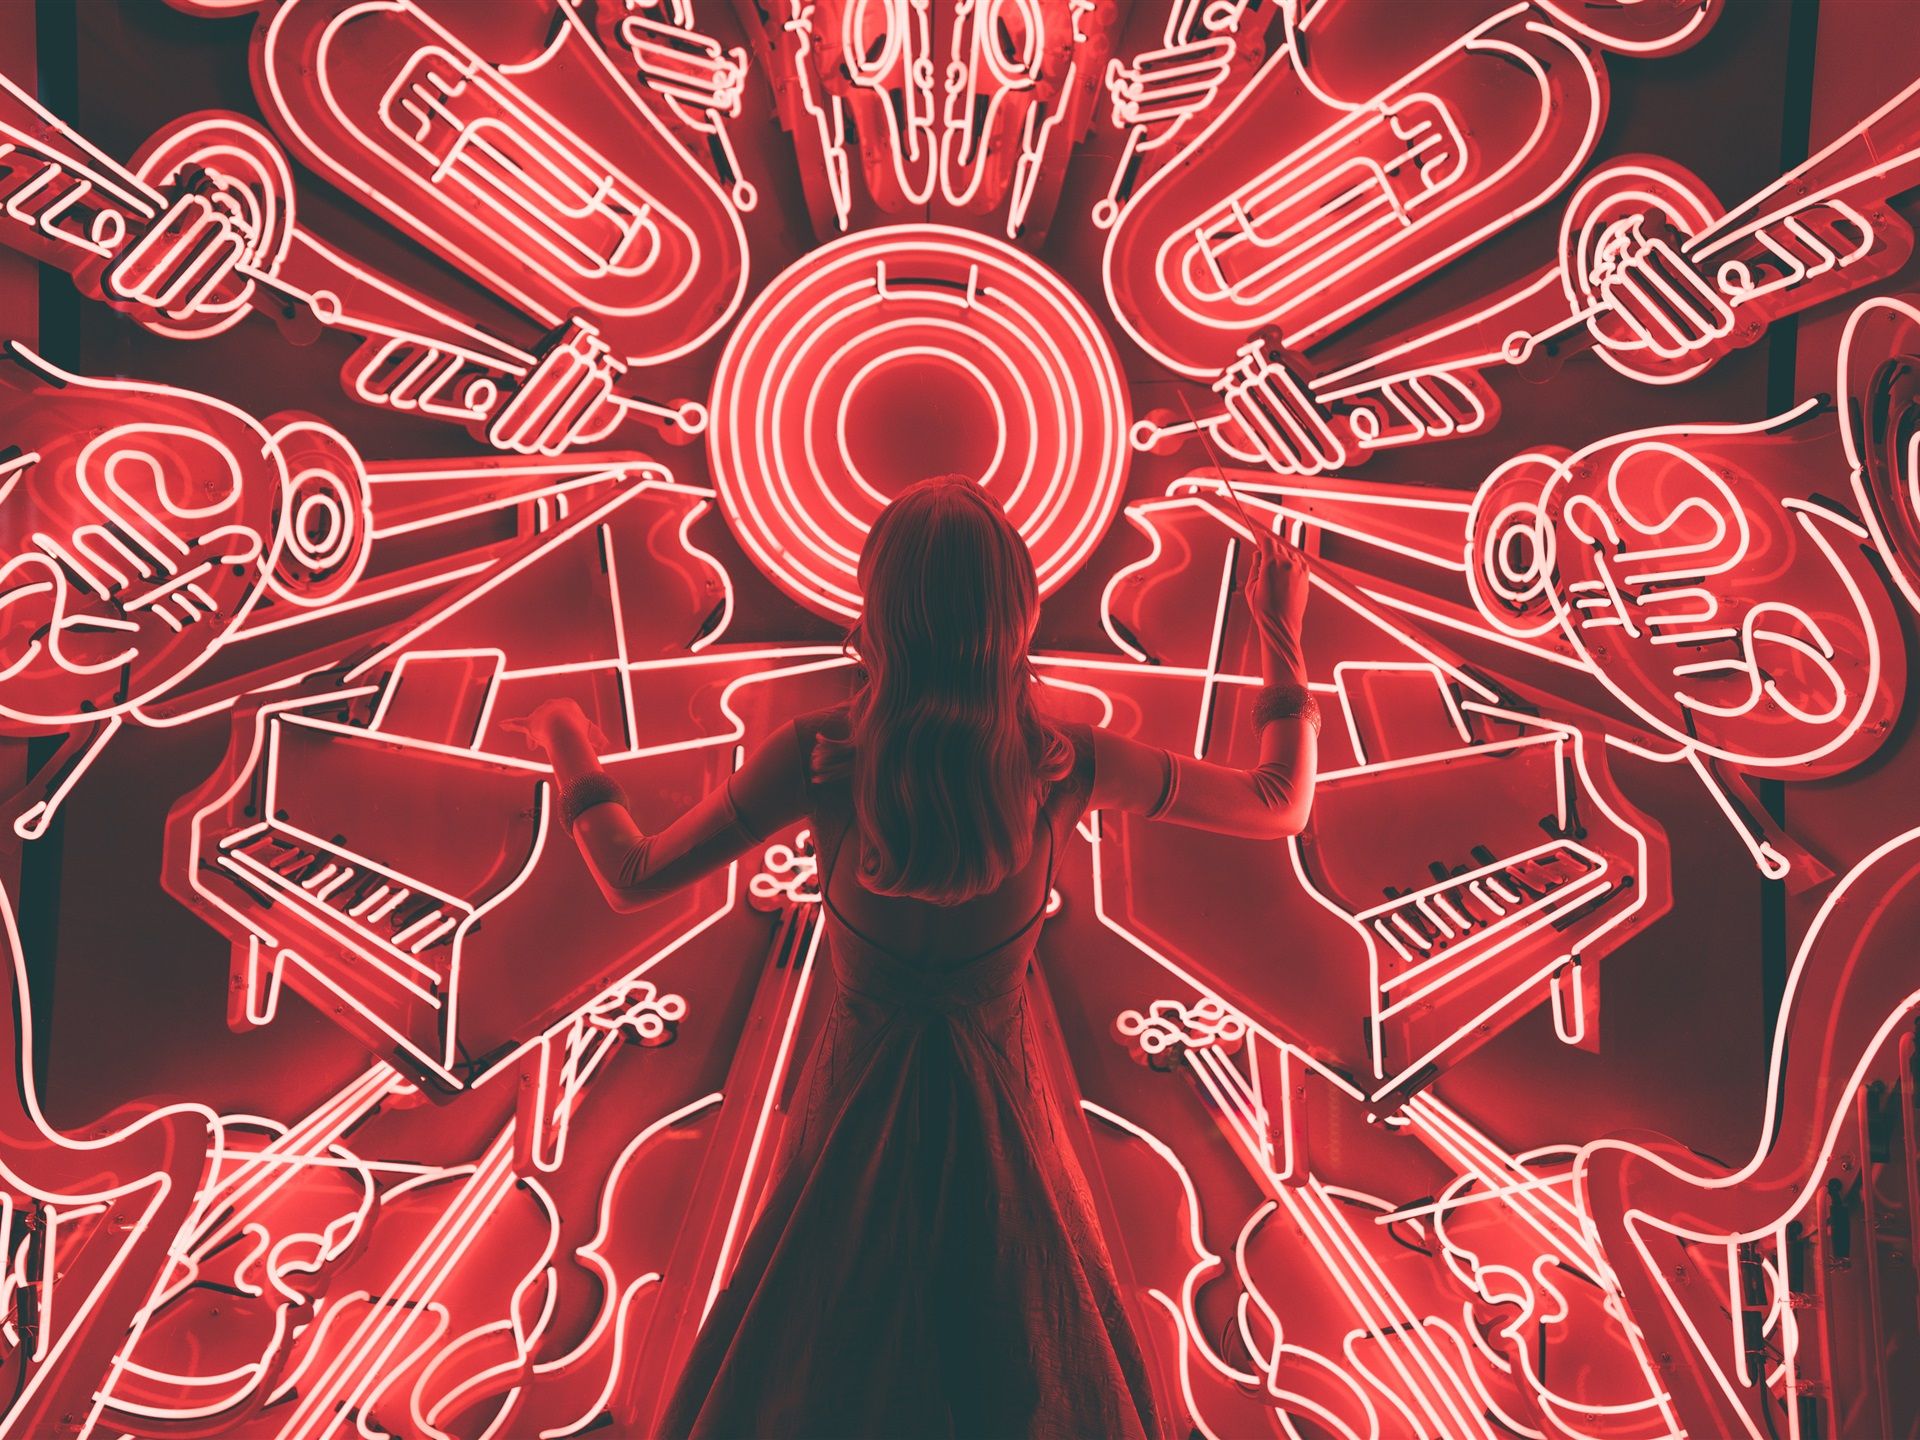 Wallpaper Girl back view, musical instruments neon lights 3840x2160 UHD 4K Picture, Image